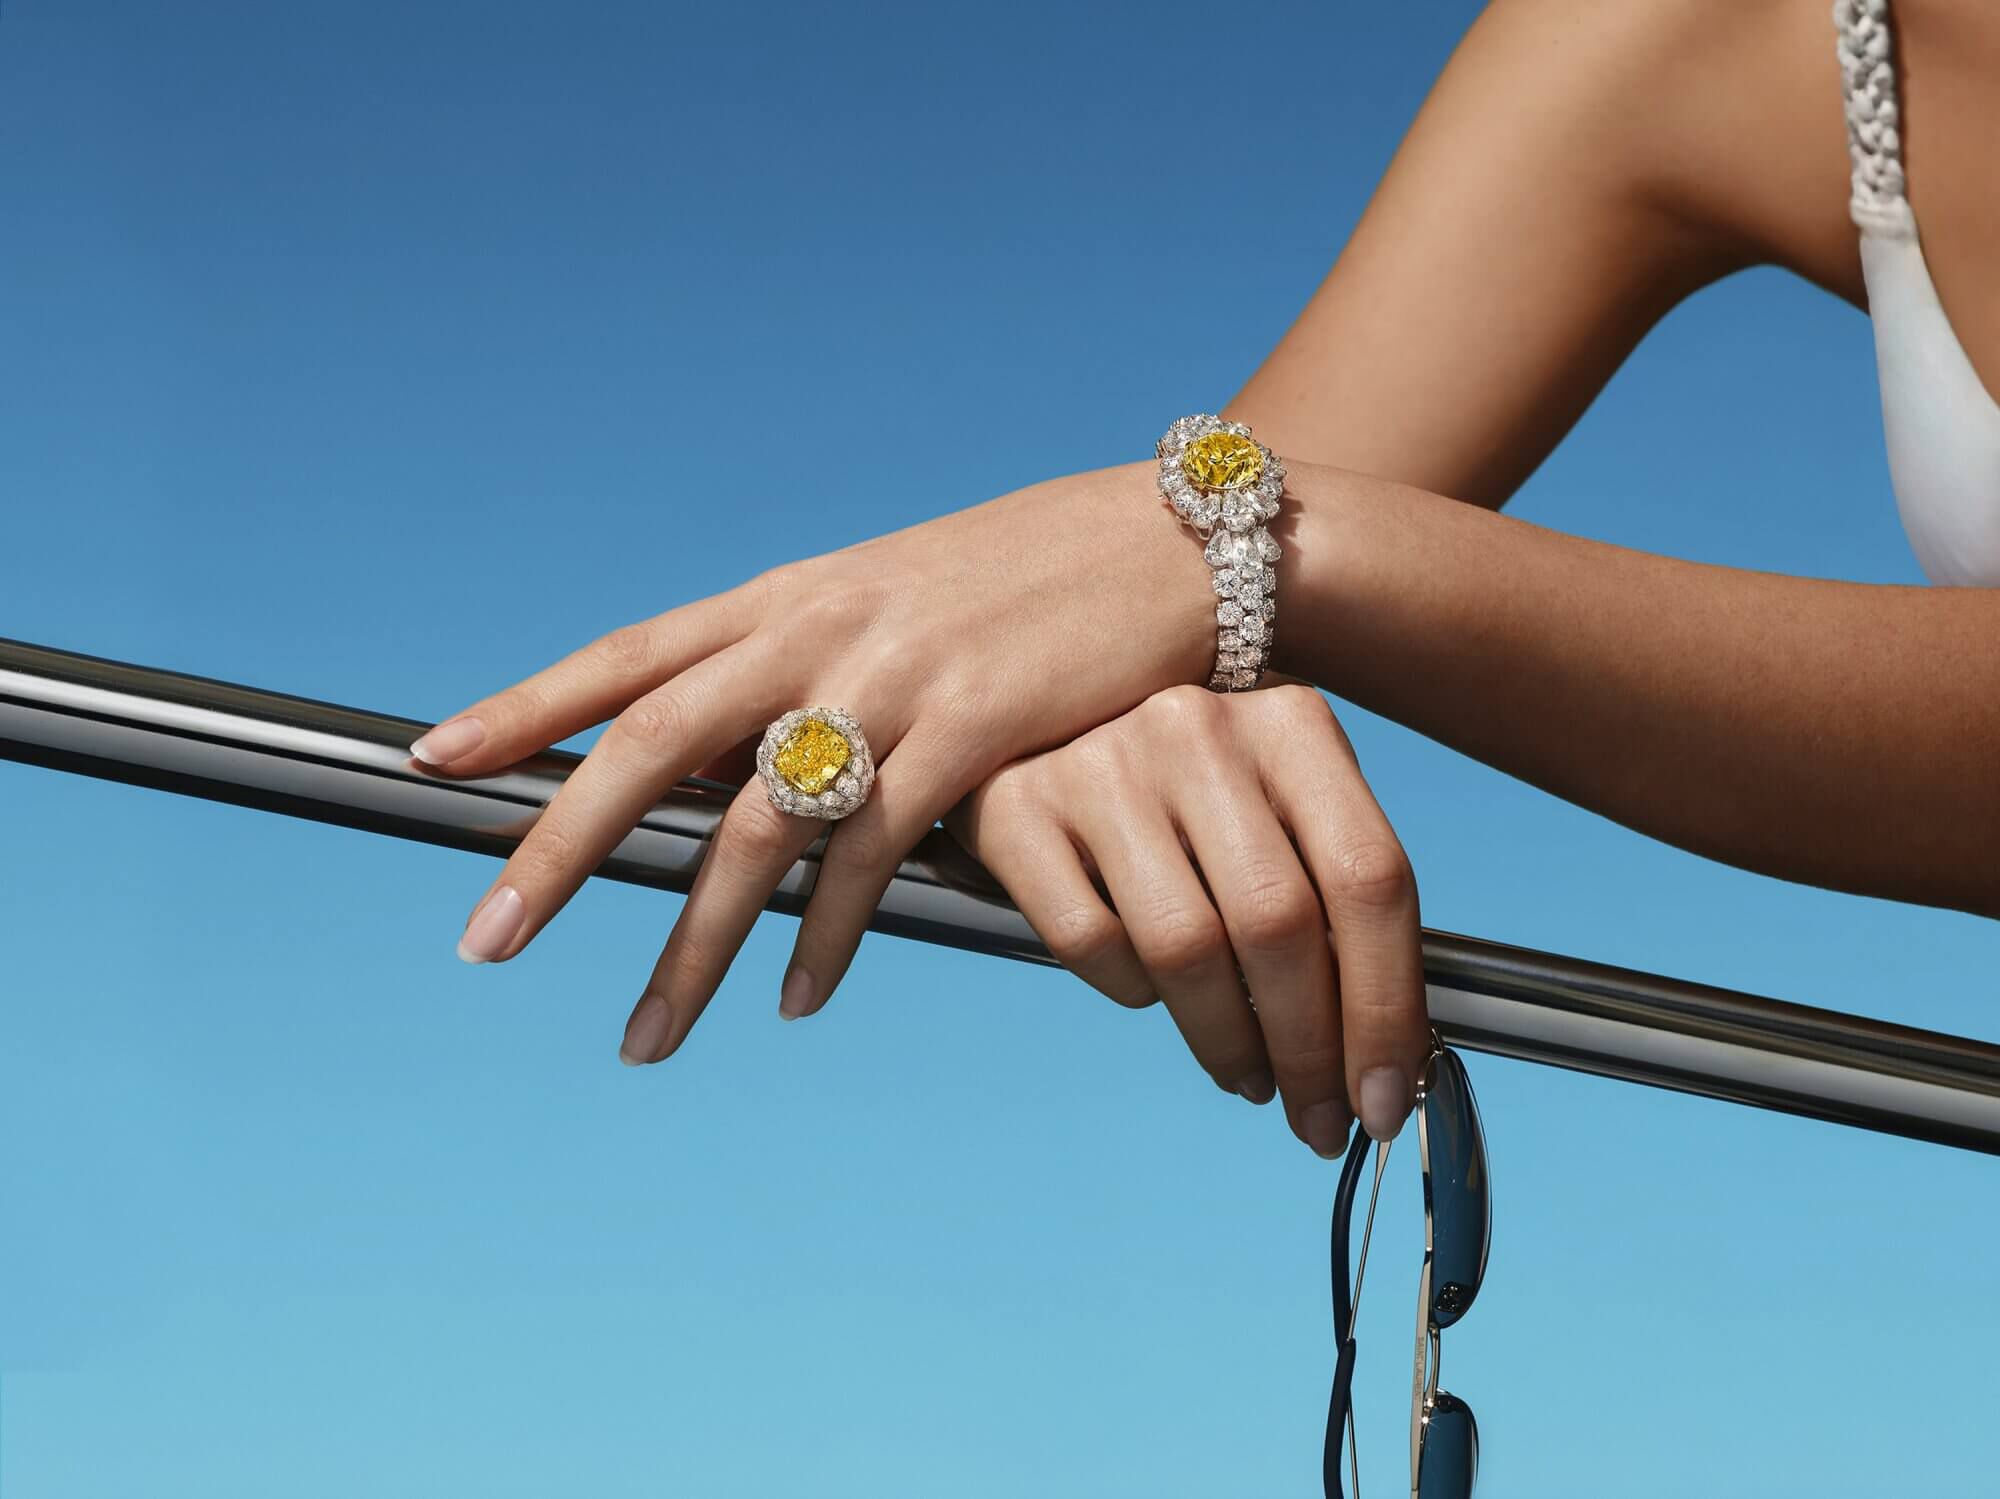 A lady on a boat wearing a yellow and white diamond Bracelet and ring from the Graff high jewellery collection